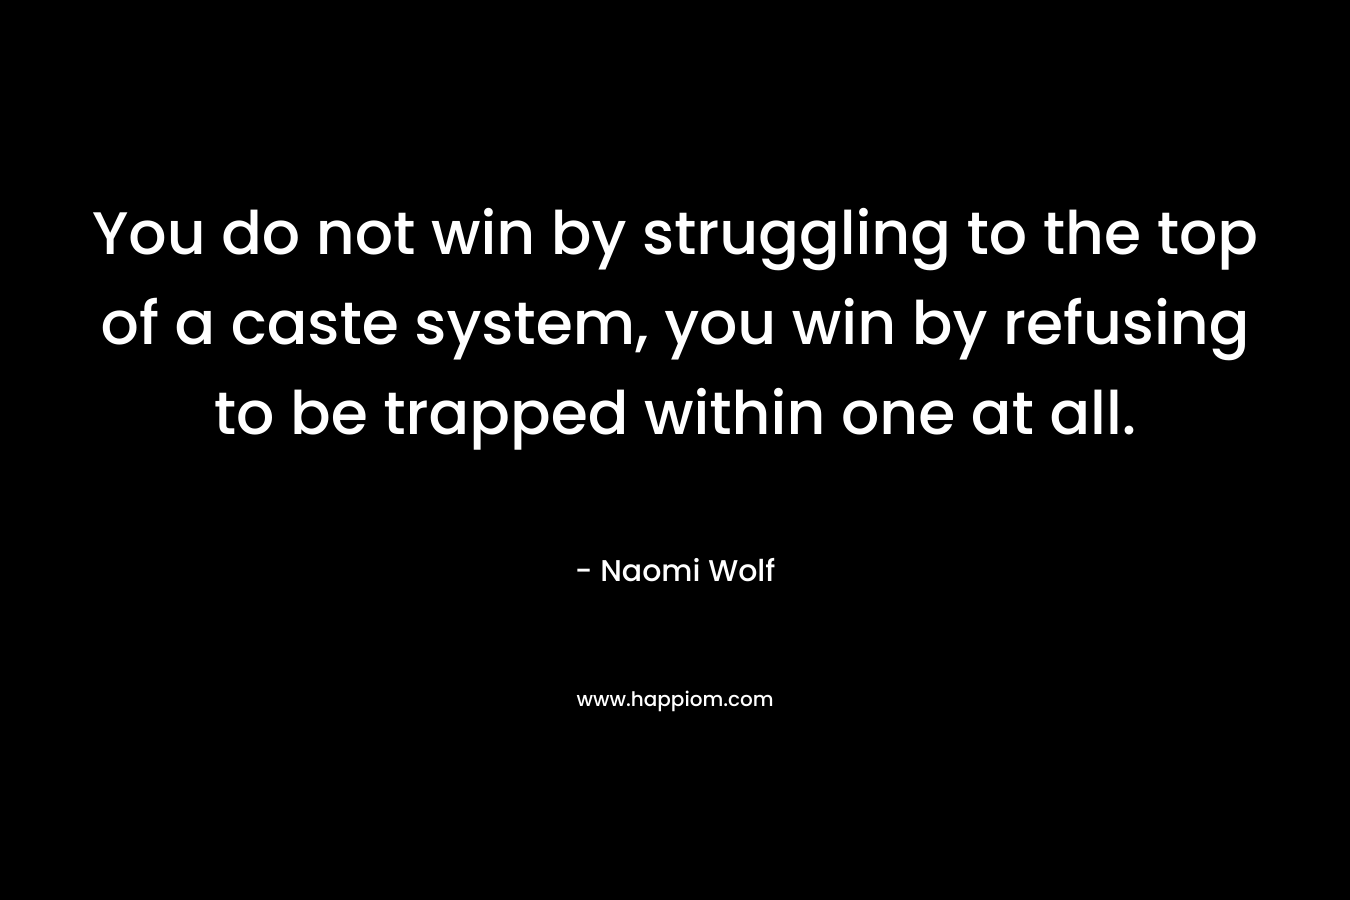 You do not win by struggling to the top of a caste system, you win by refusing to be trapped within one at all.